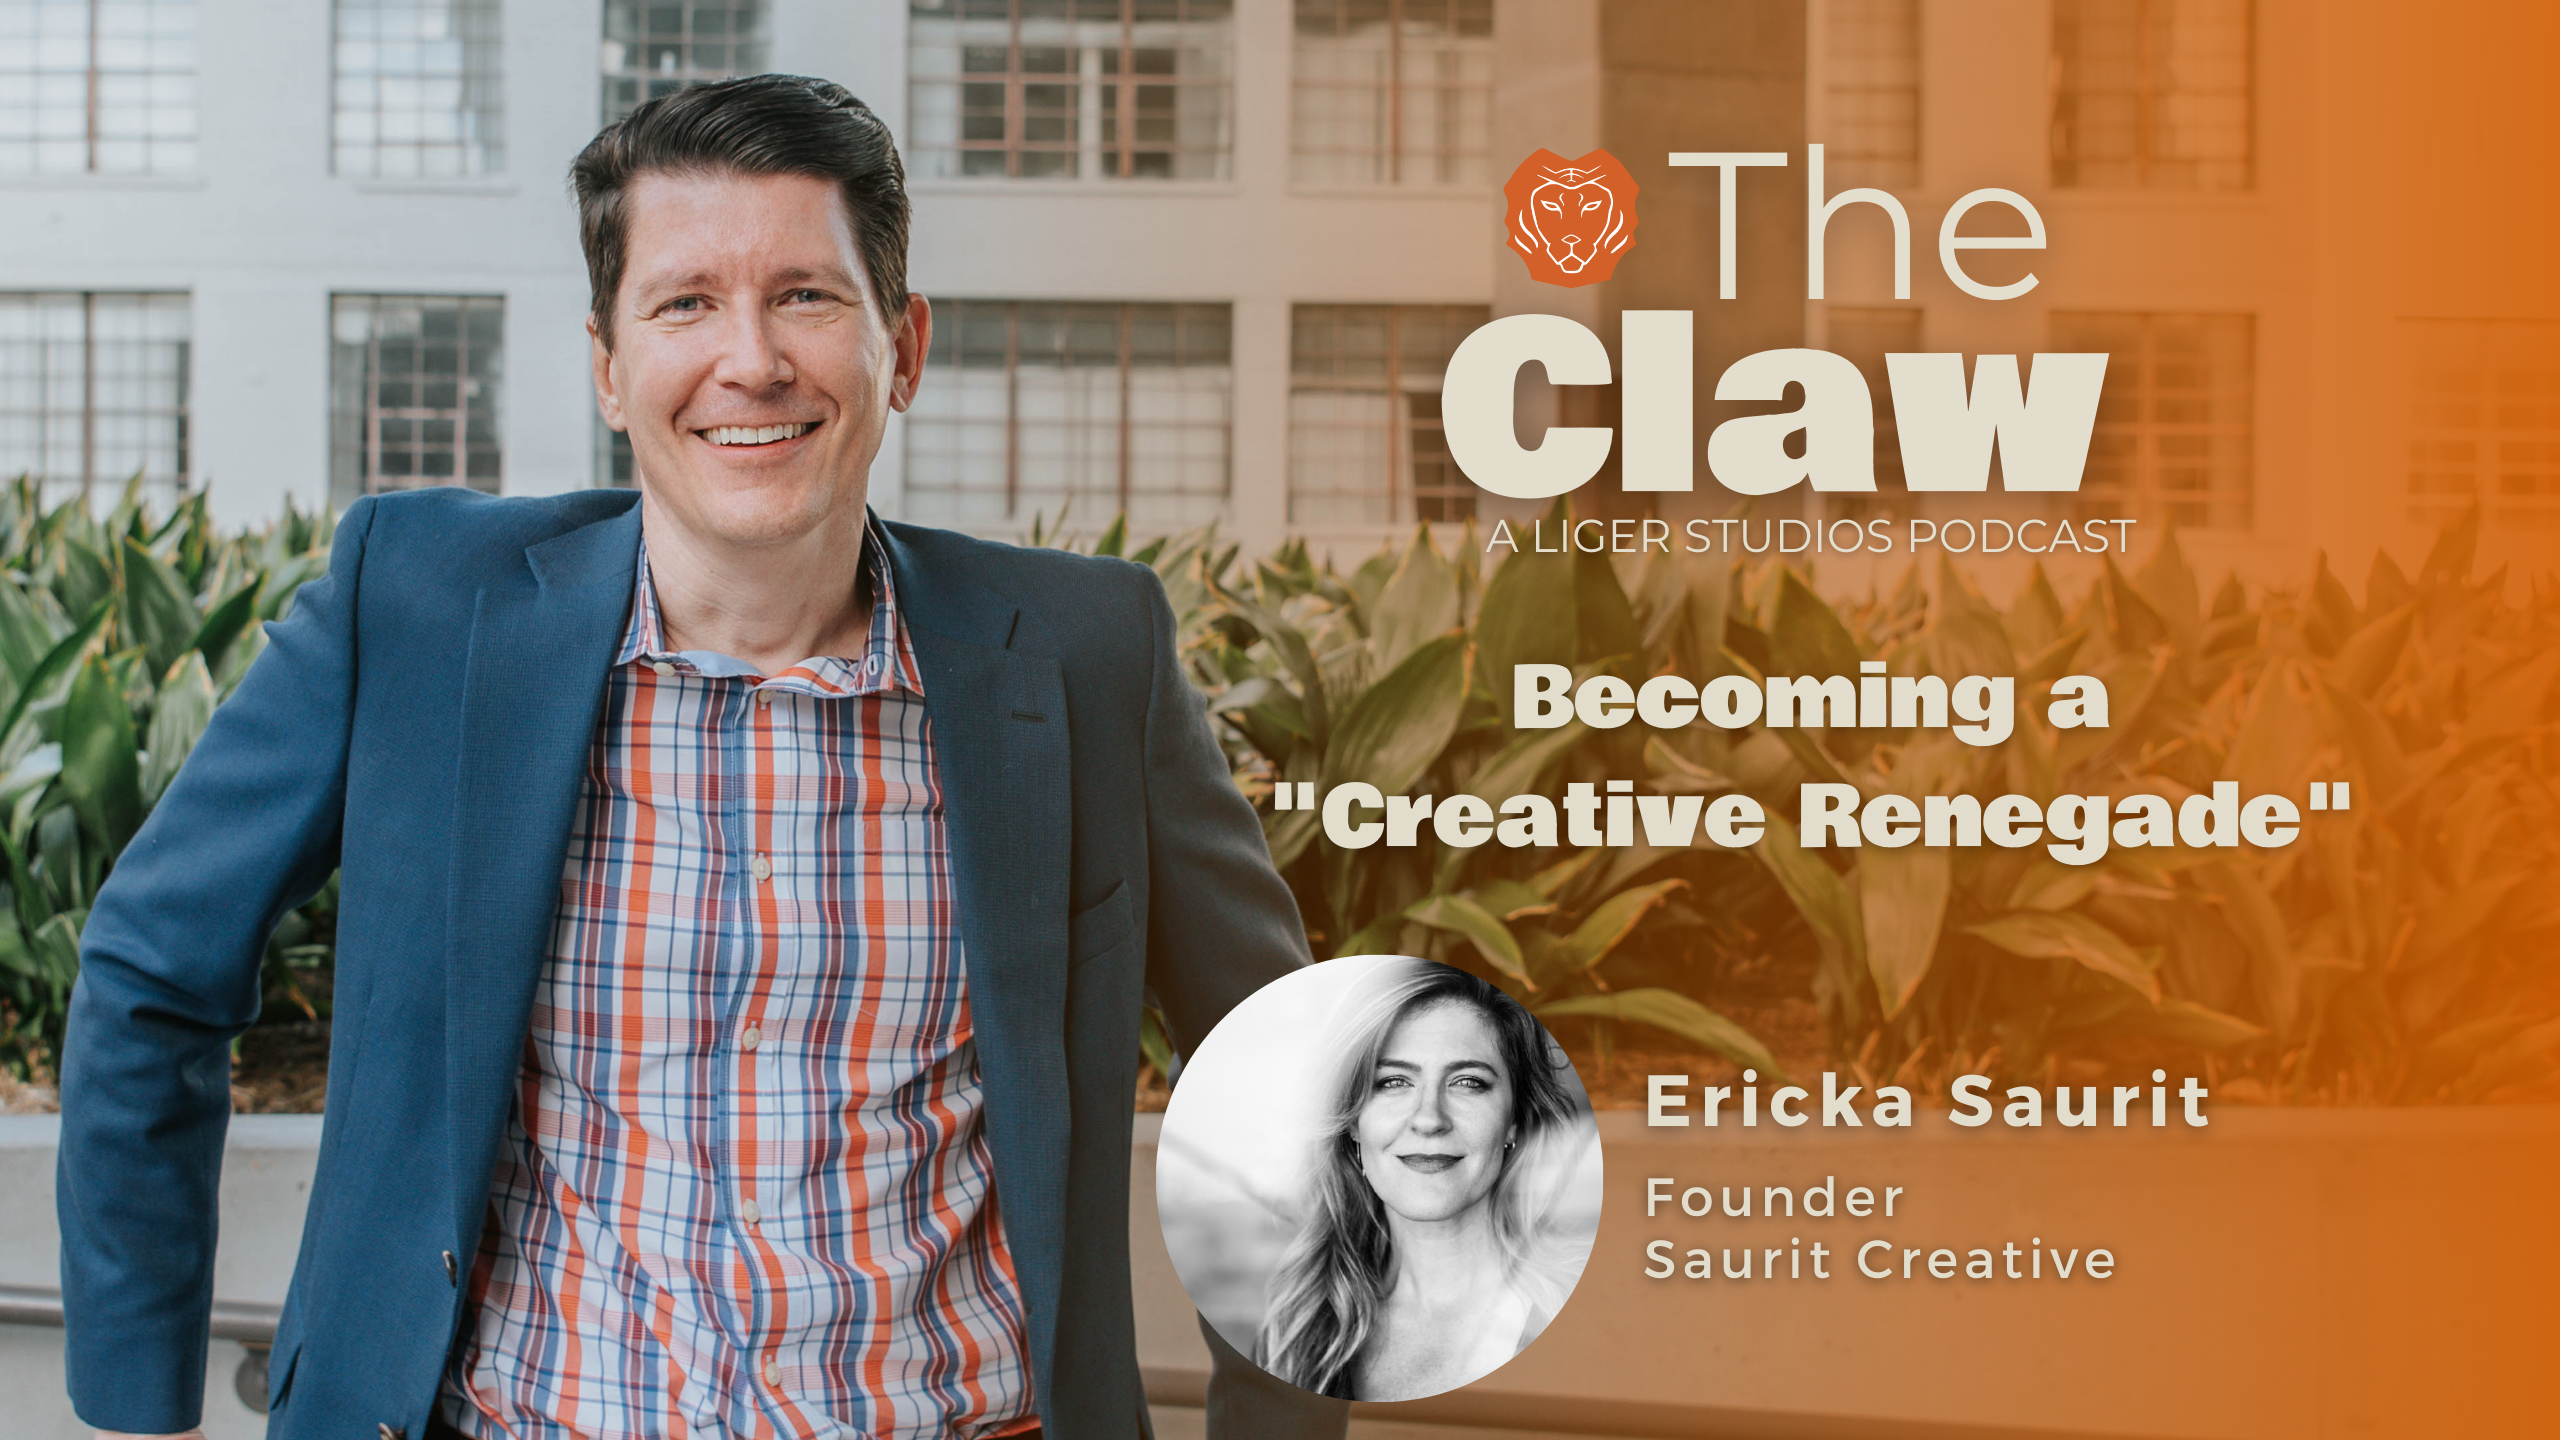 The Claw Podcast: Becoming a “Creative Renegade” with Ericka Saurit